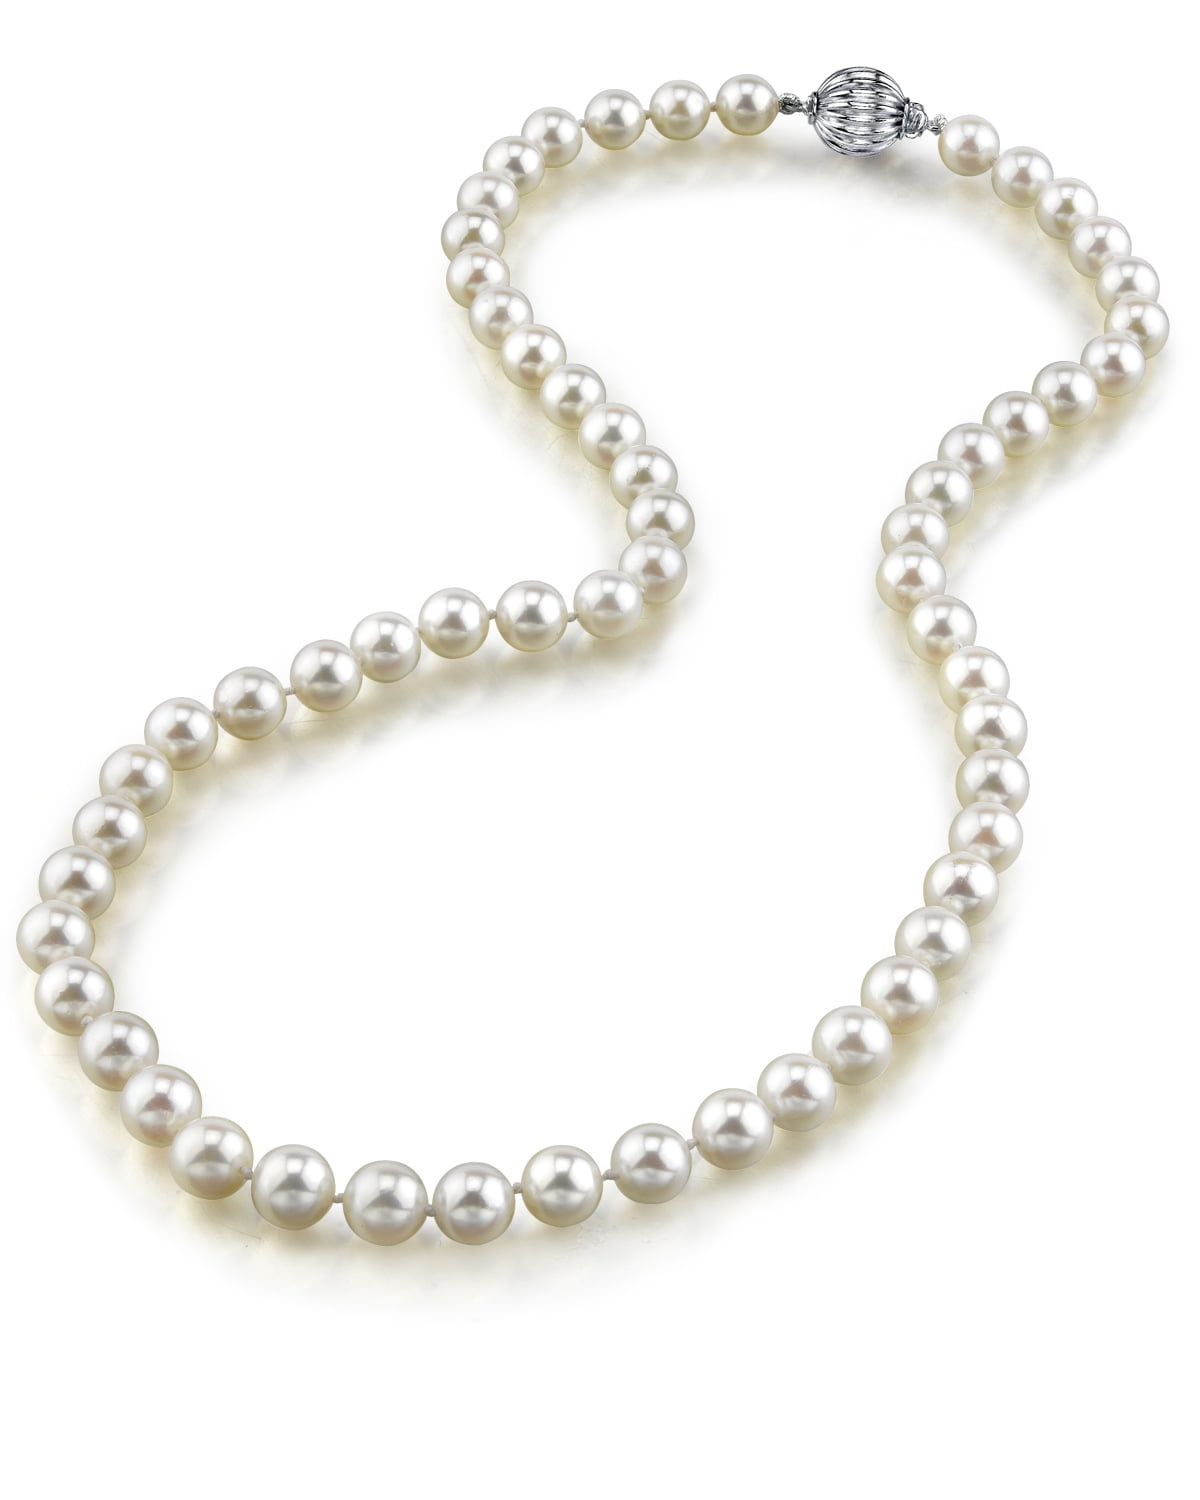 New pearl bracelet 14K gold saltwater single strand white 4 MM bridesmaid gifts! 